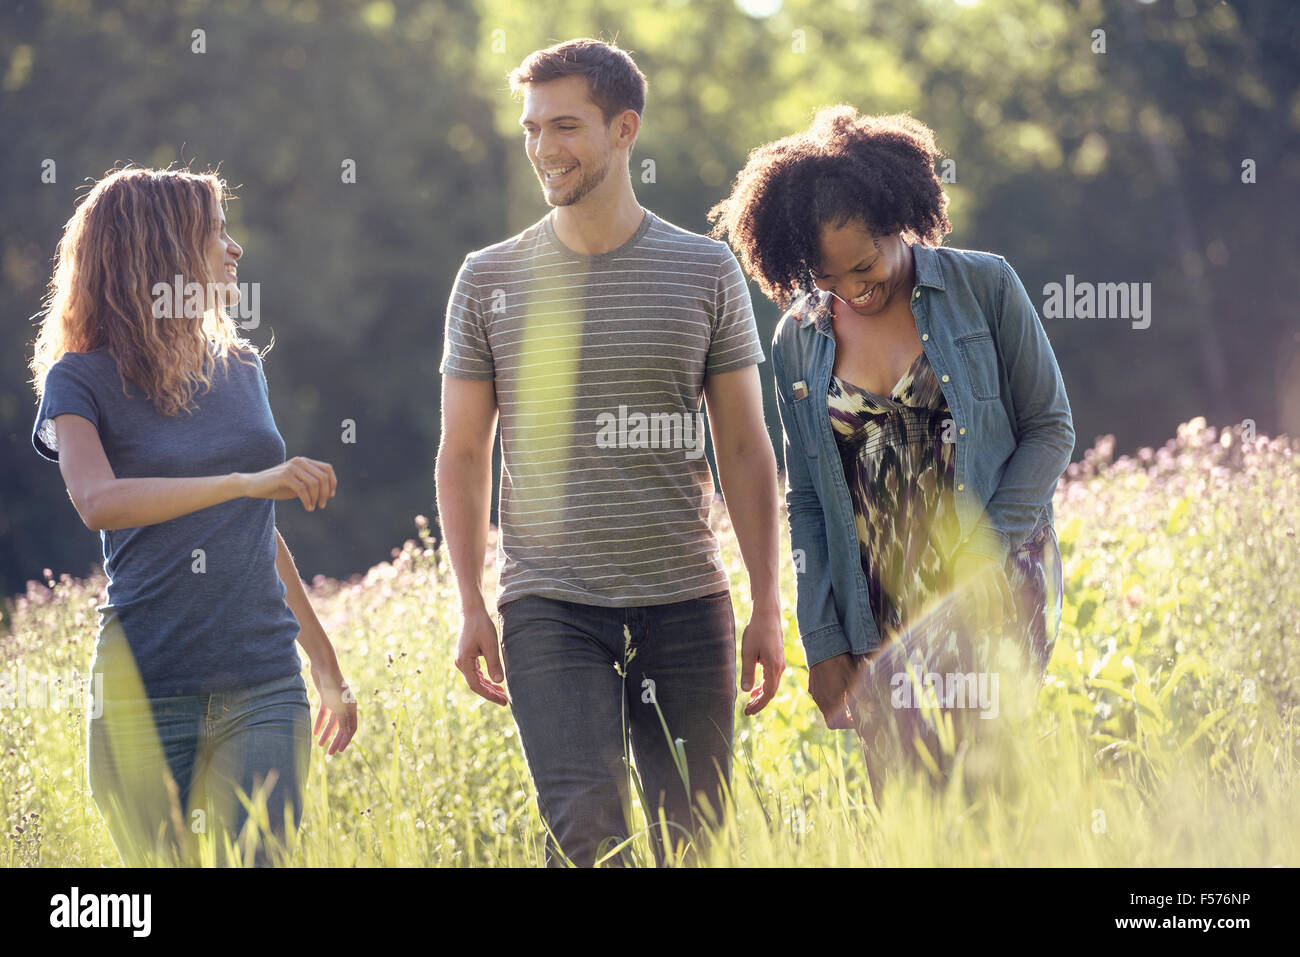 Three people, a man and two women walking through tall grass in a meadow. Stock Photo